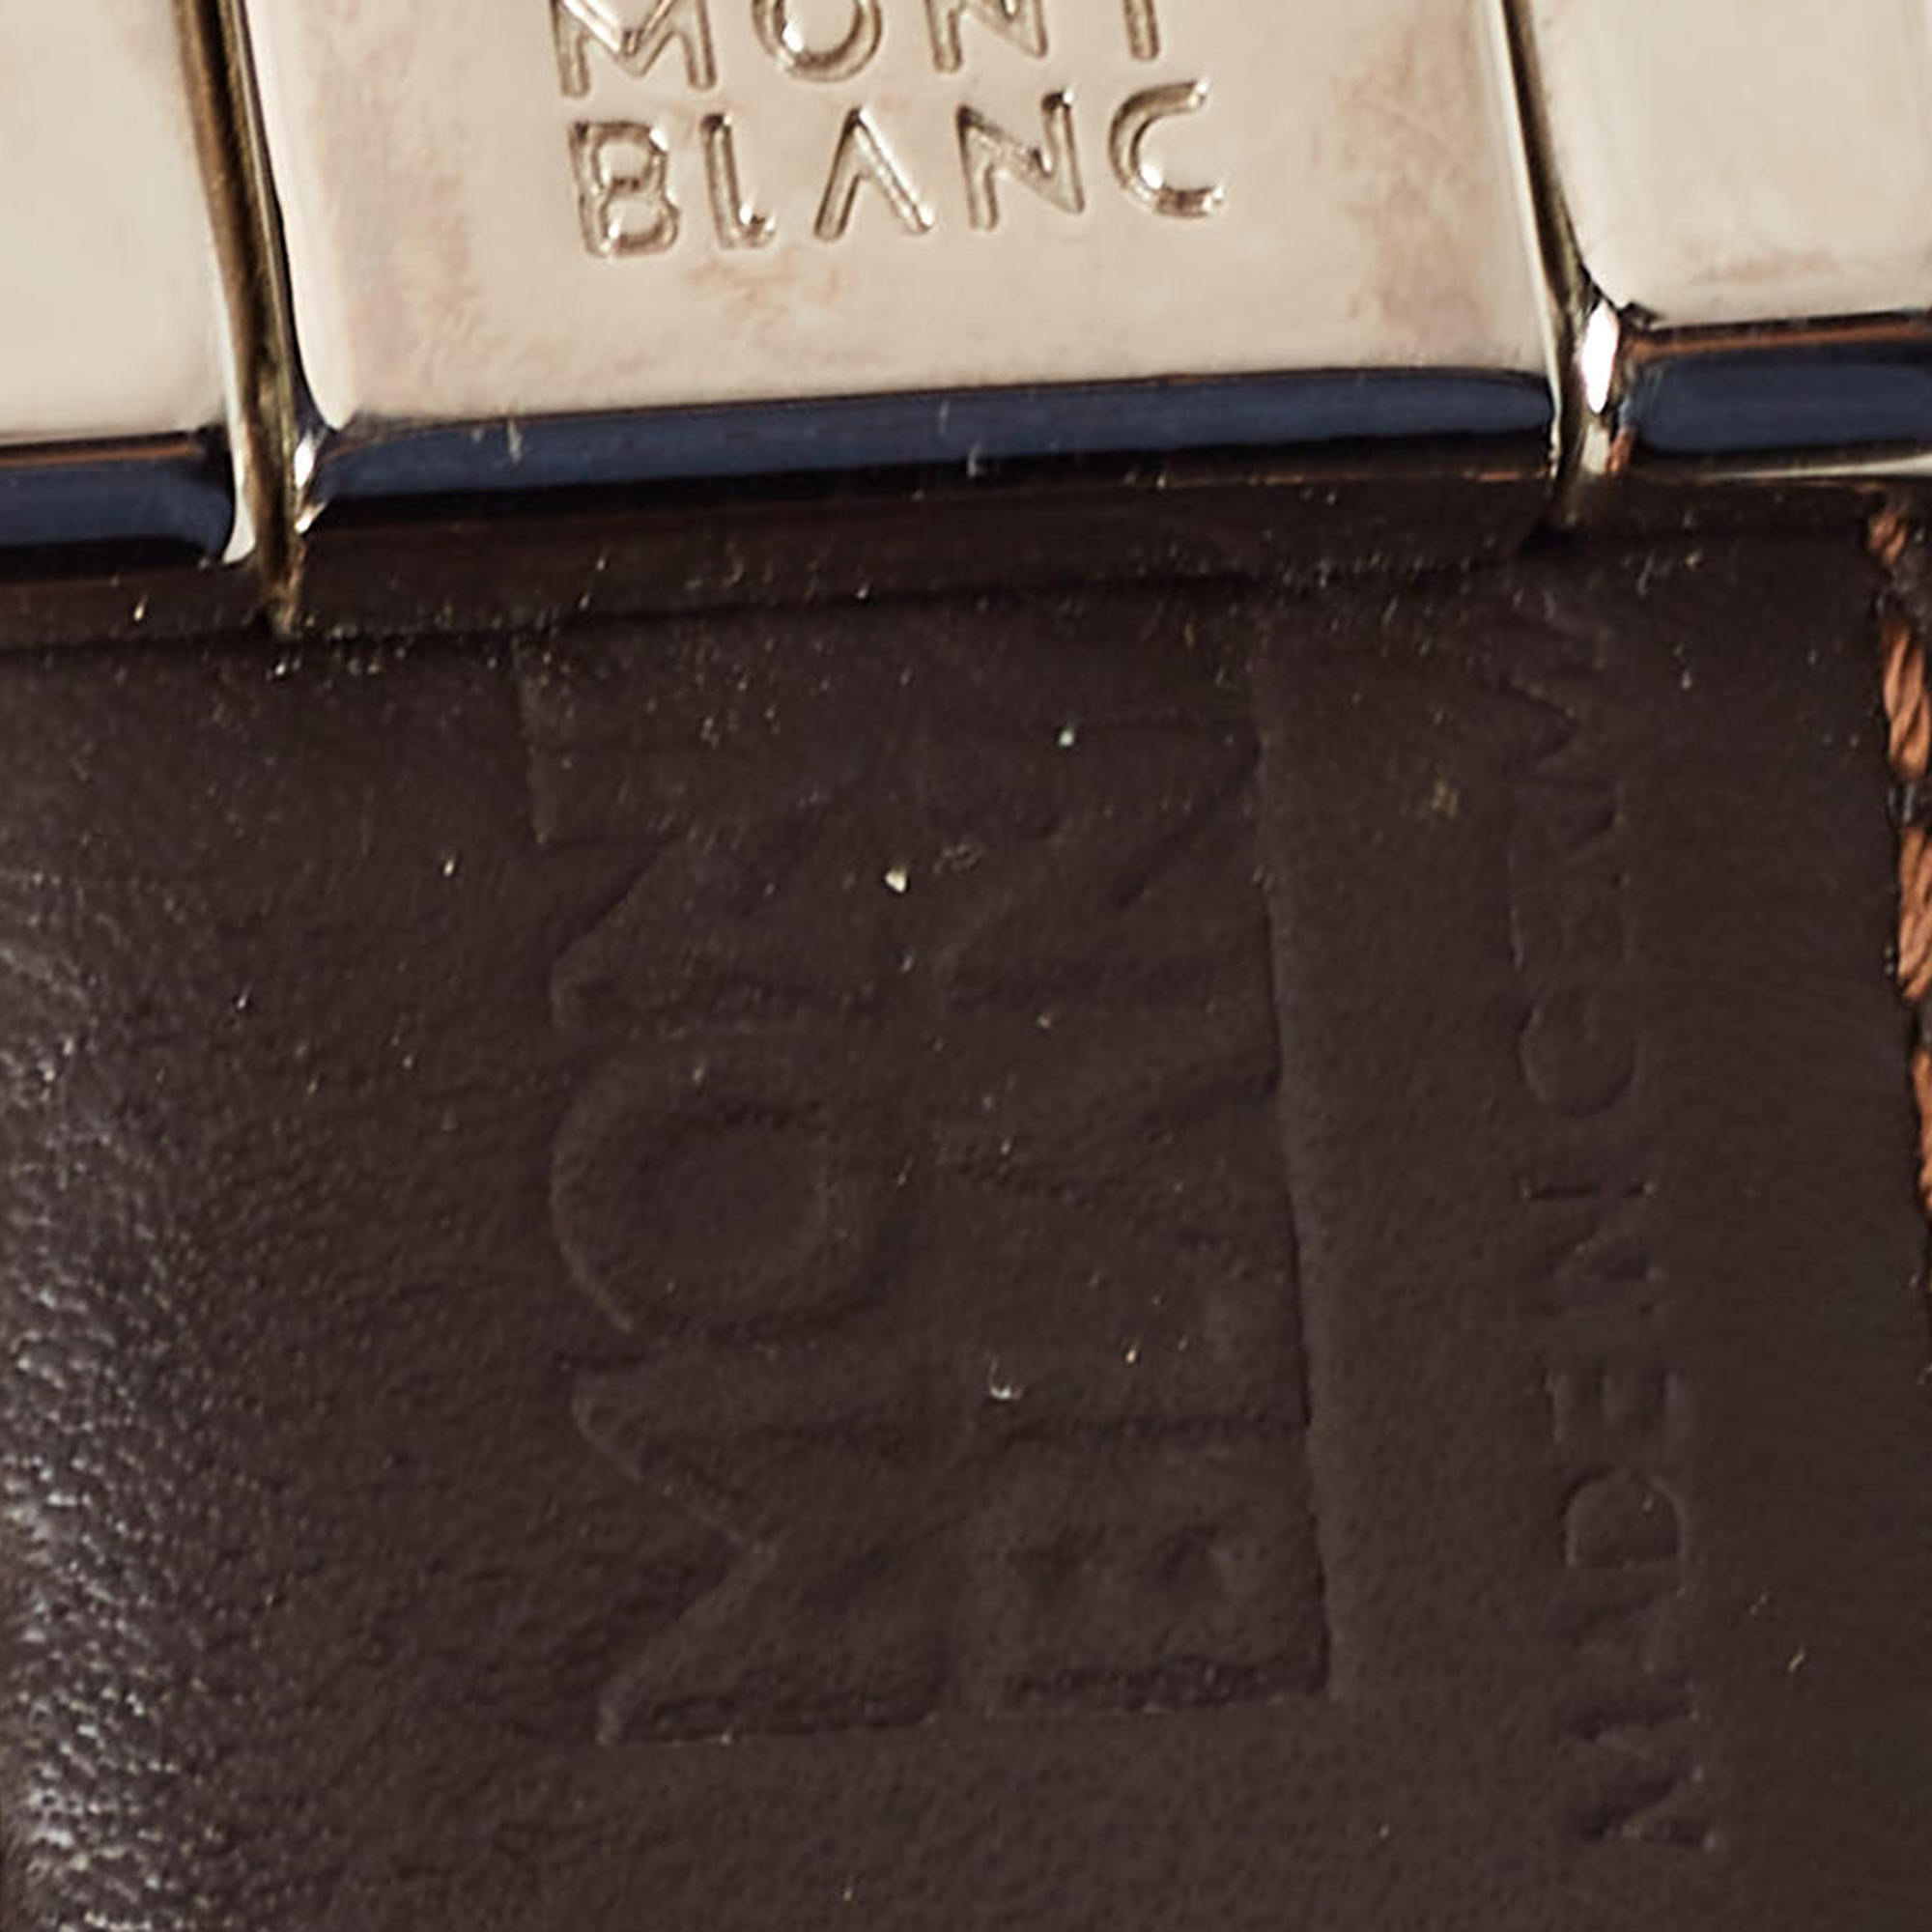 Montblanc Black/Brown Leather Cut To Size Reversible Belt